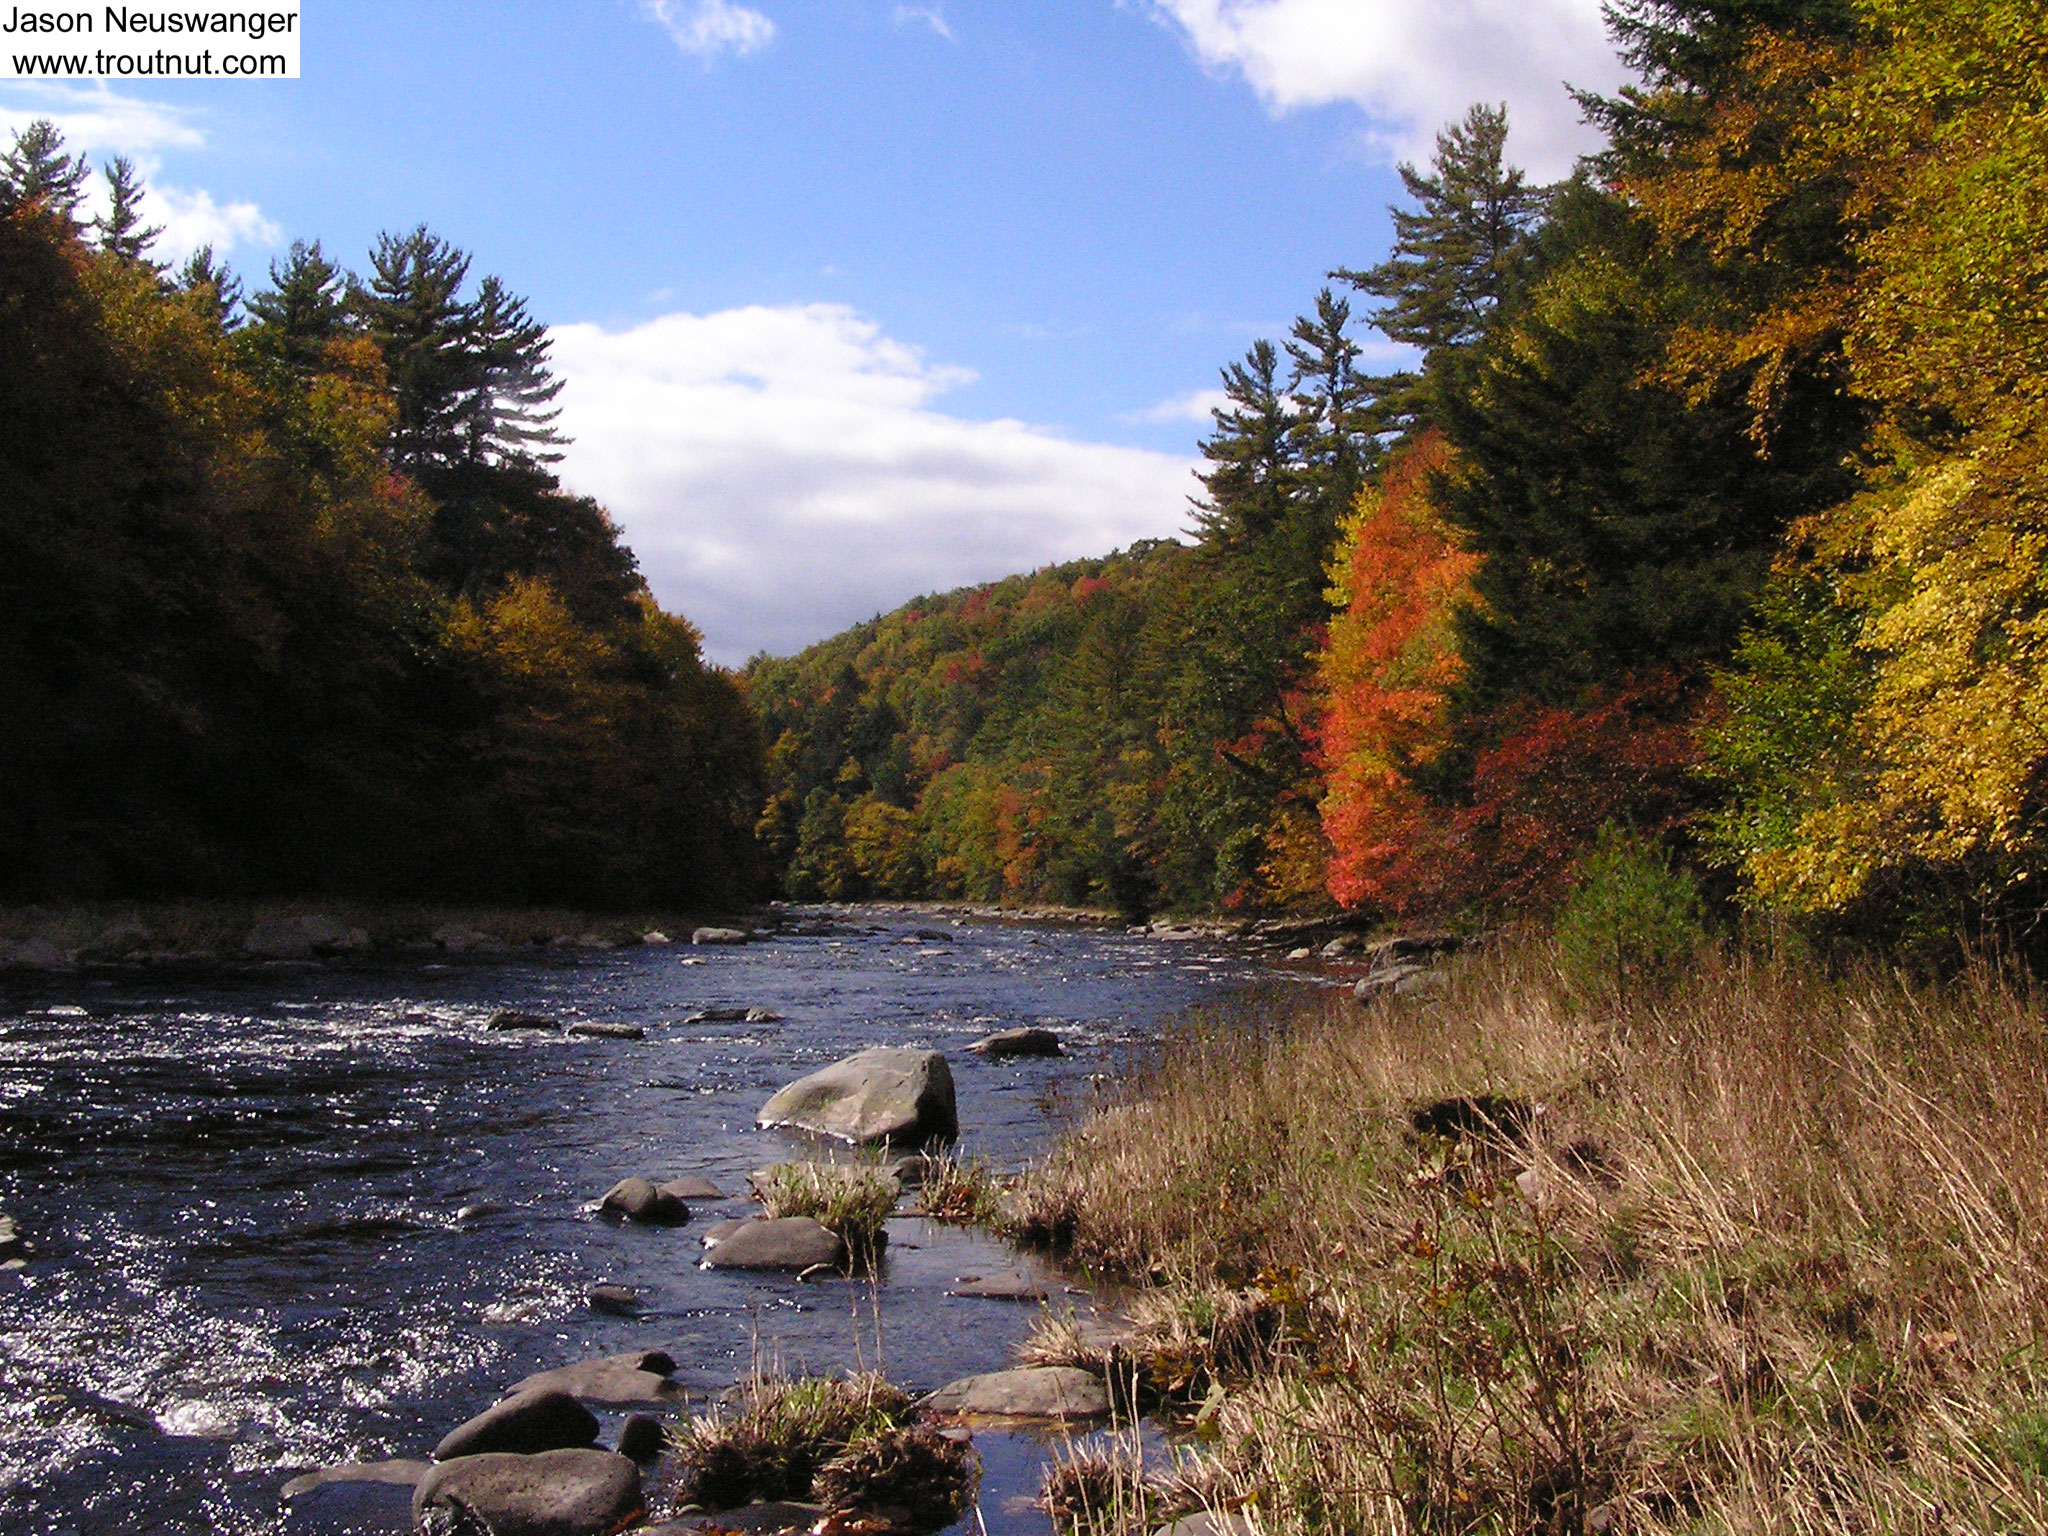 This beautiful, remote stretch of one of the lesser-known large Catskill trout streams produced my only trout in two days of slow fishing, a 9 inch brown. Better than nothing! In fact, even "nothing" in this setting is really something! From the Neversink River Gorge in New York.